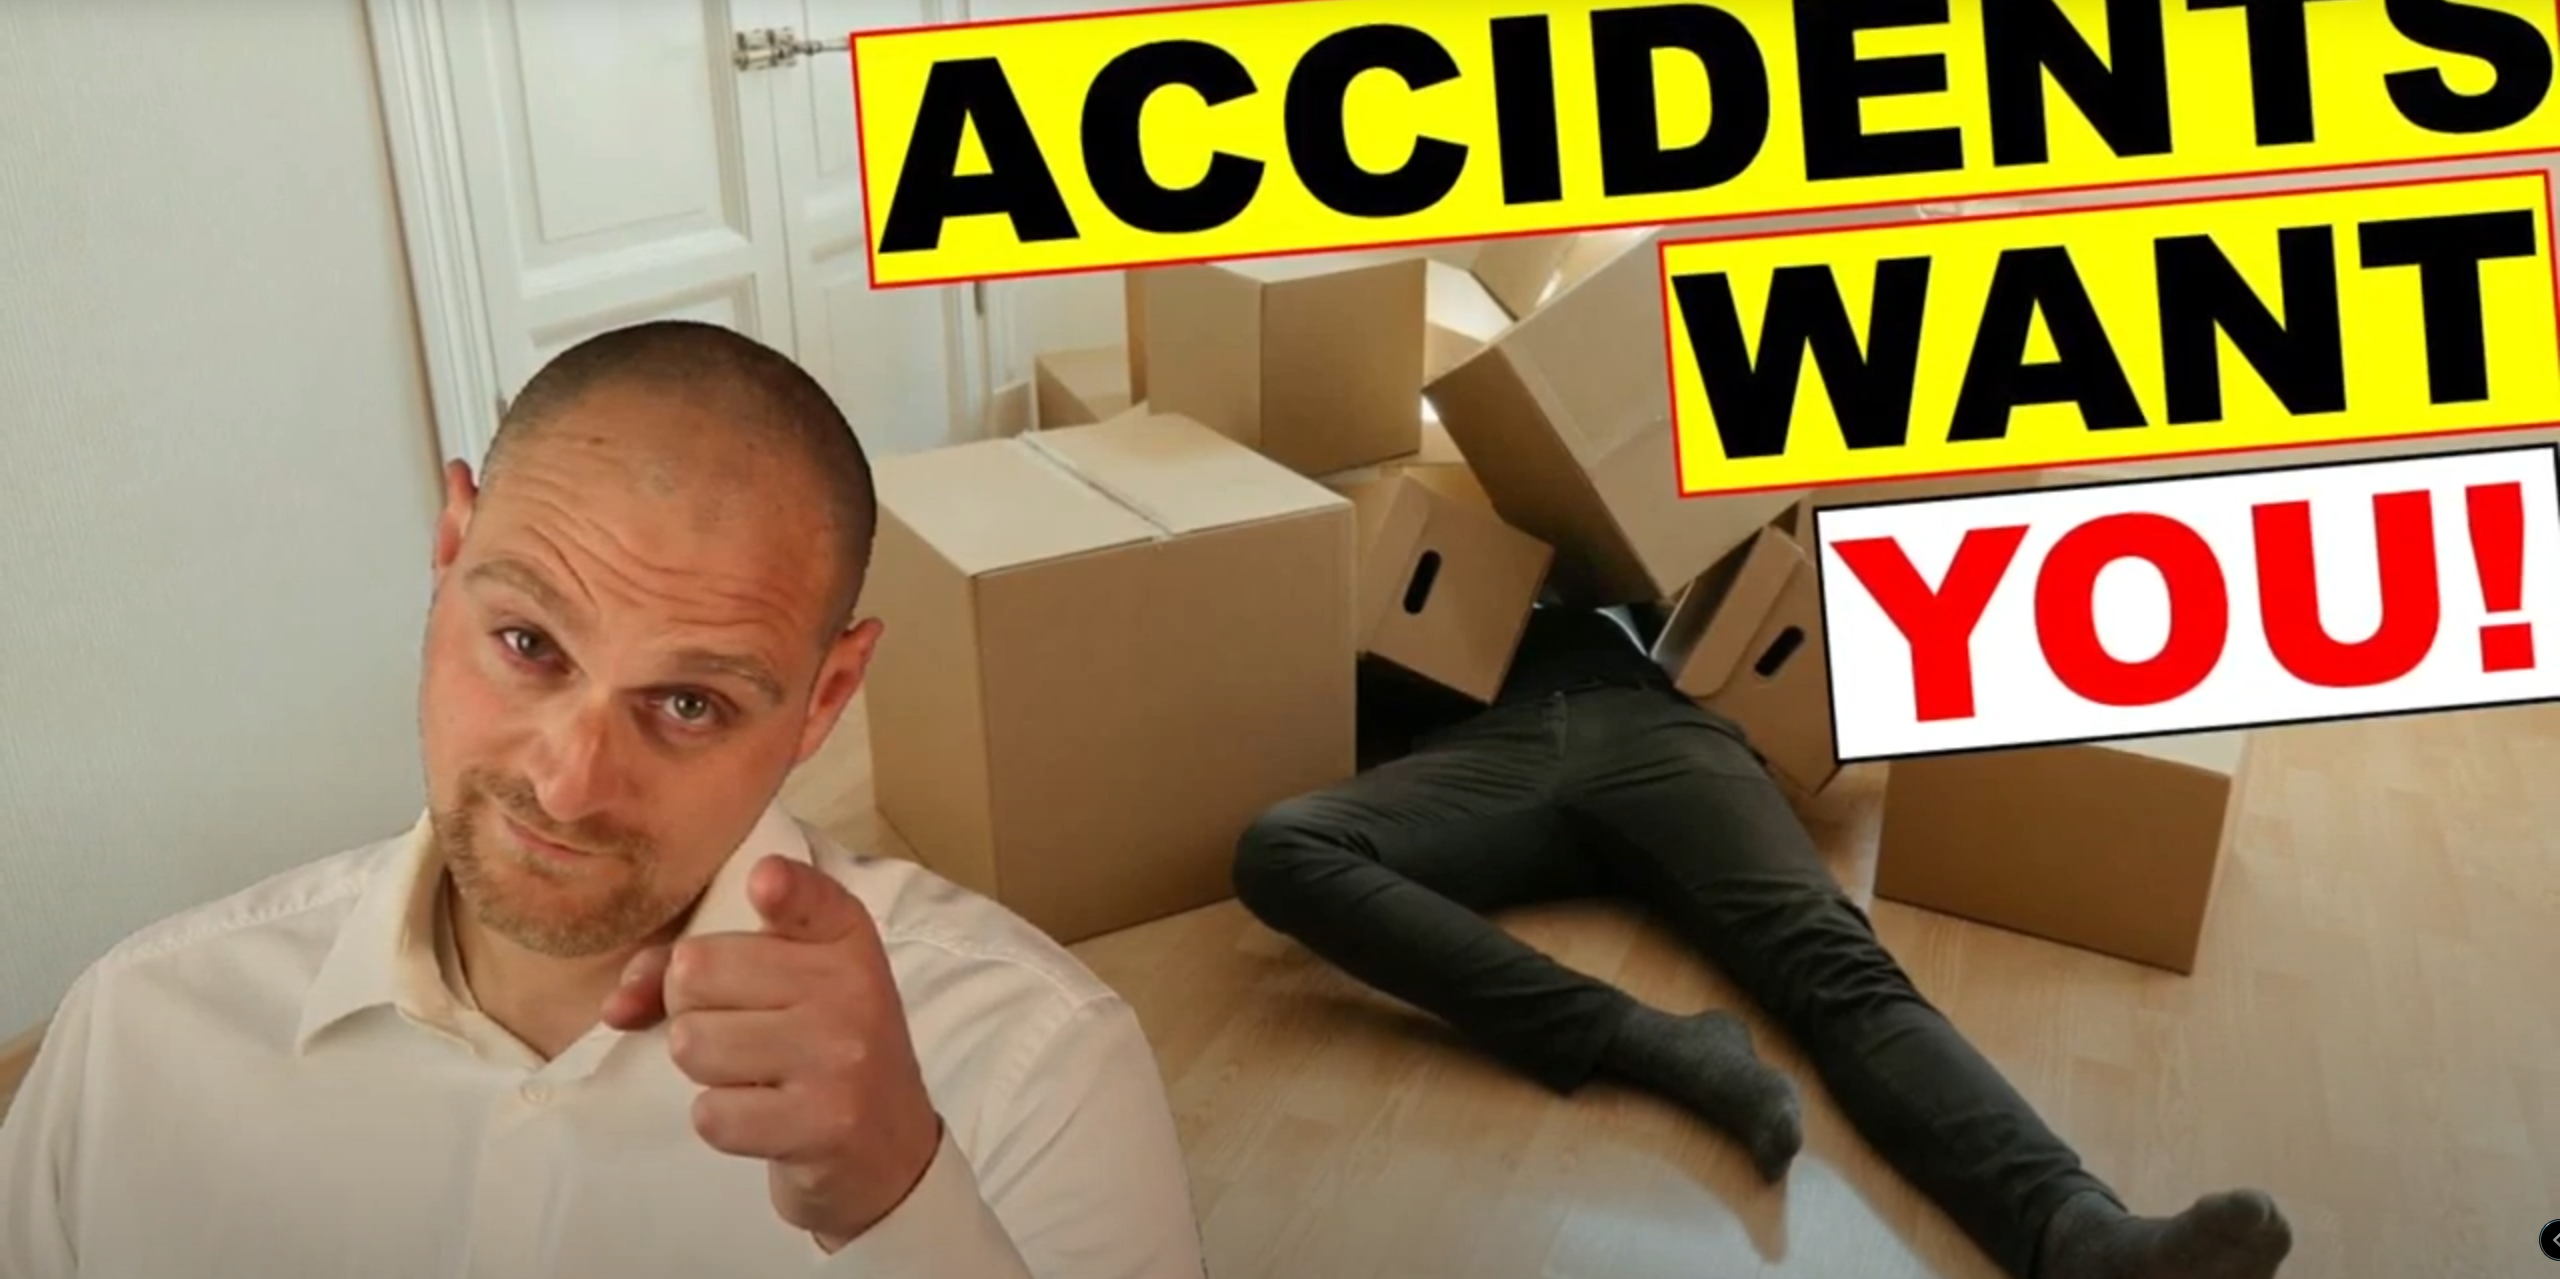 Accidents Want YOU! – Safety Moment